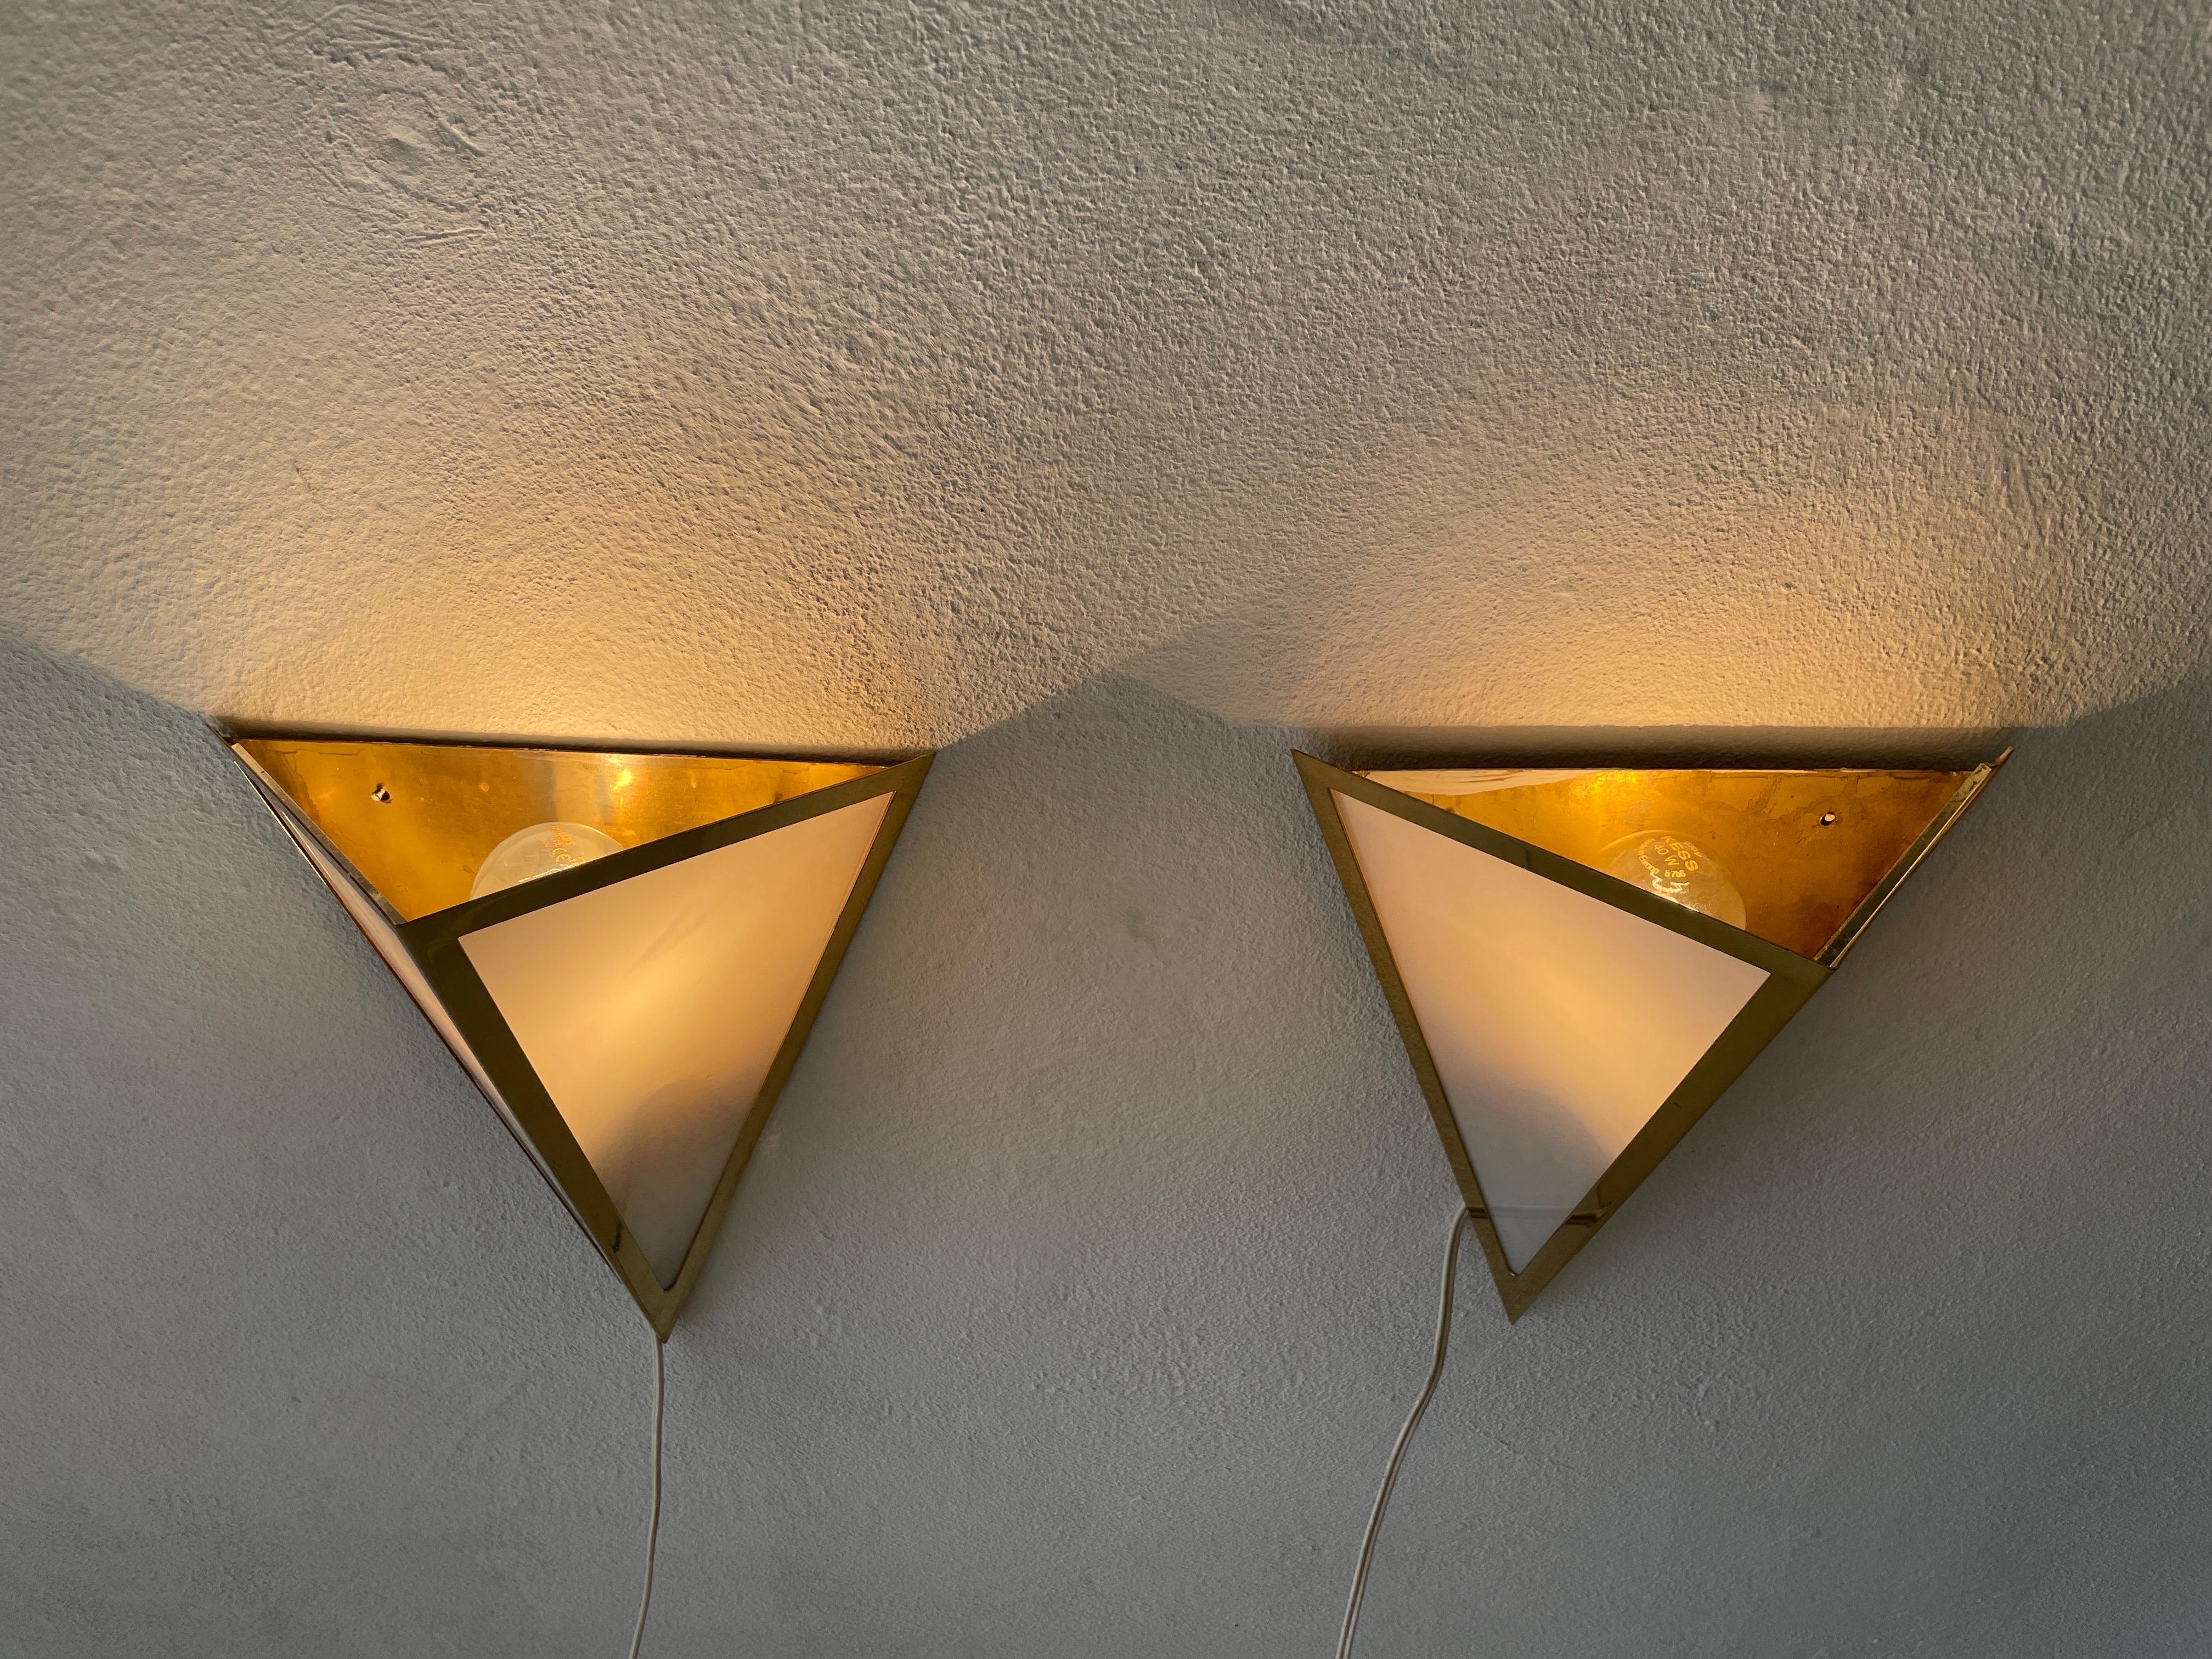 Triangle Design Opal Glass and Gold Metal Pair of Sconces by WKR, 1970s, Germany For Sale 4